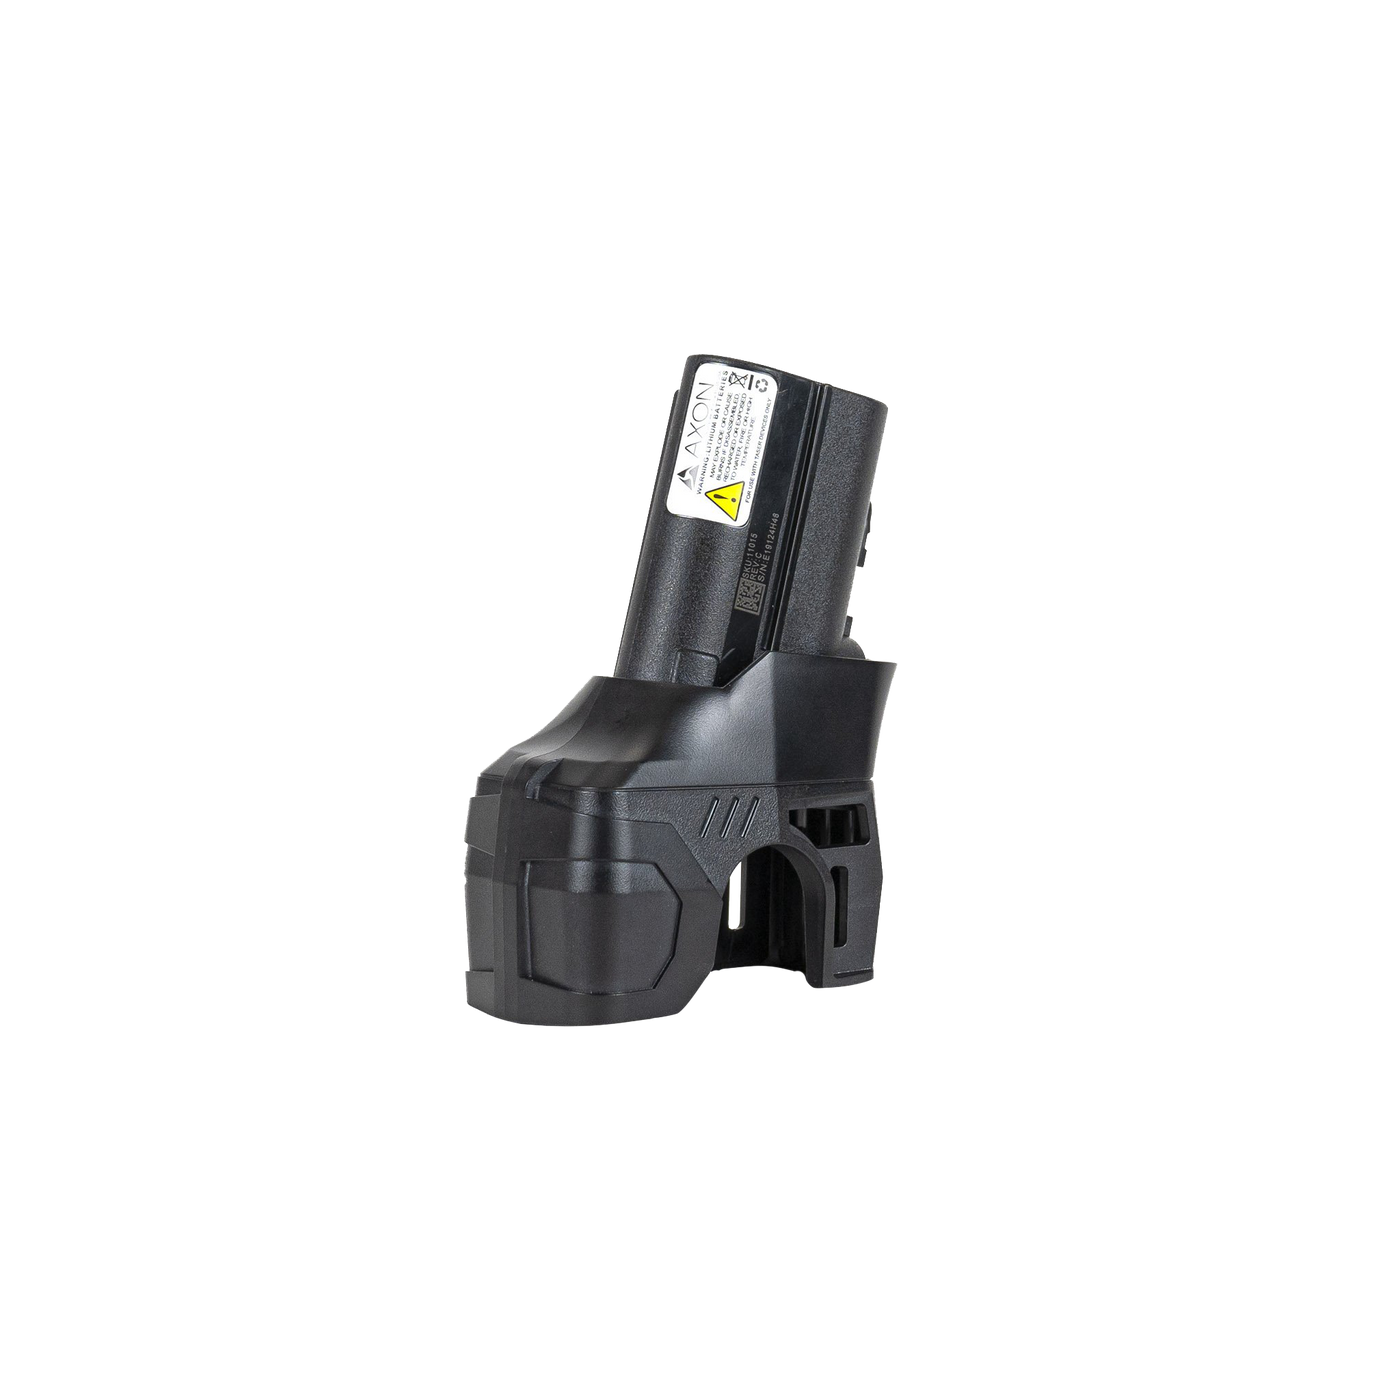 Extended Automatic Shut-Down Performance Power Magazine (XAPPM) for X1/X26P